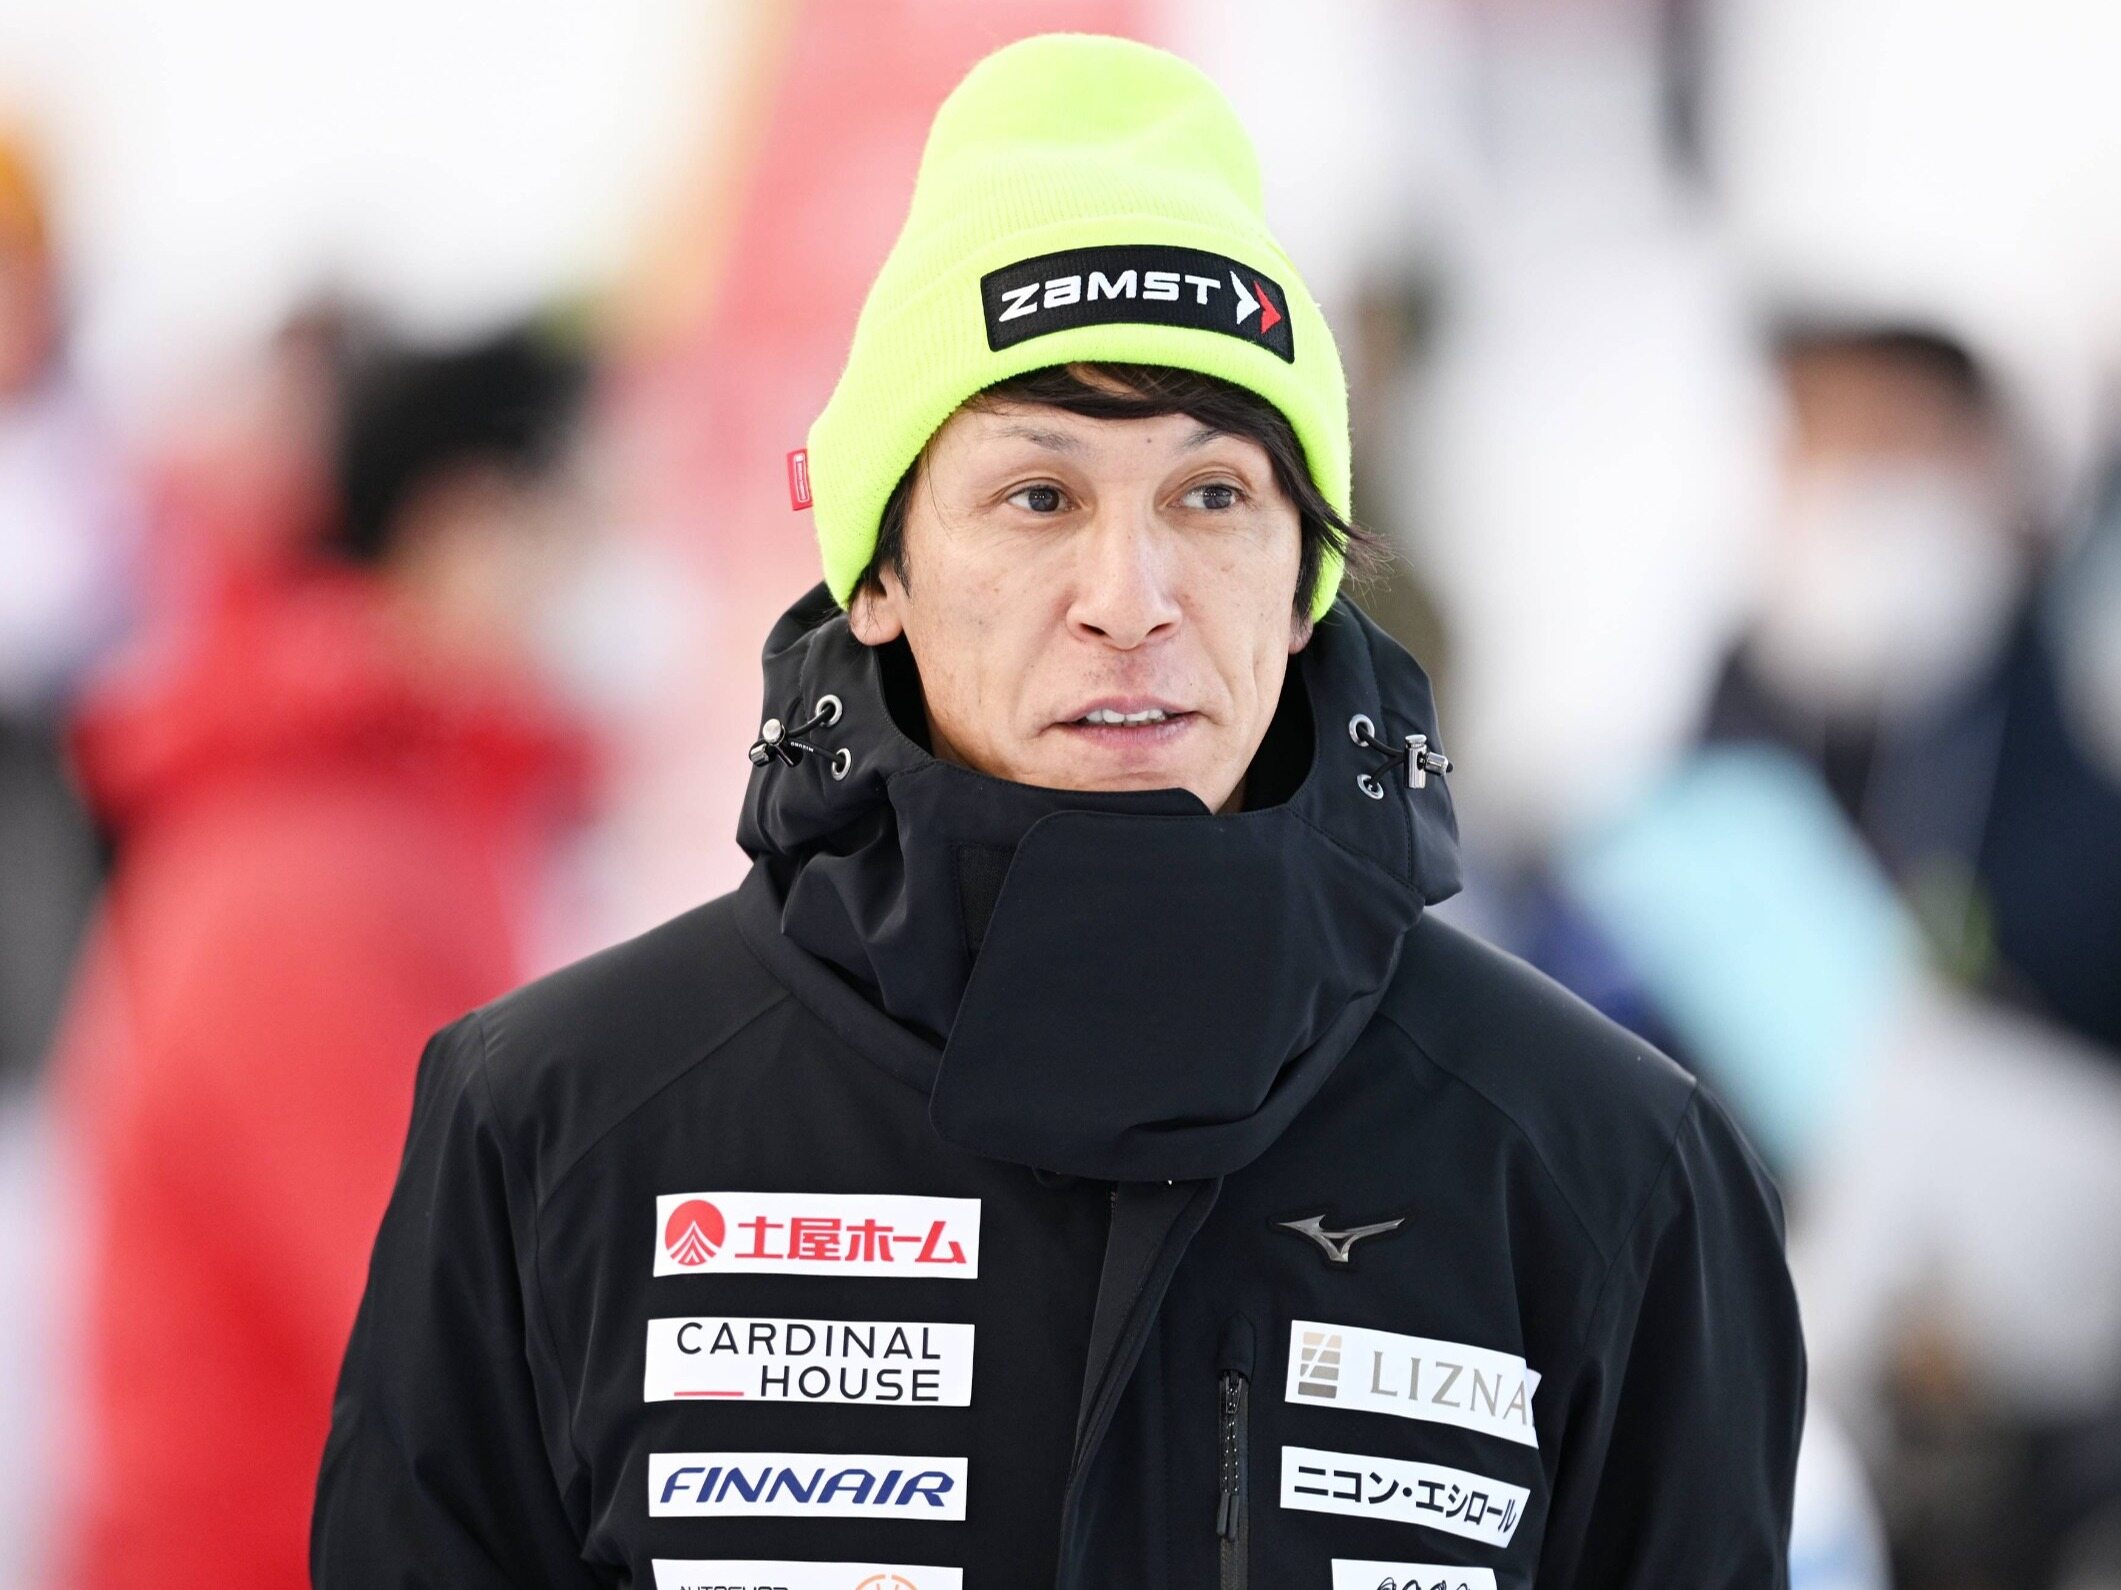 He is 52 years old and continues to amaze.  Noriaki Kasai is making a great comeback